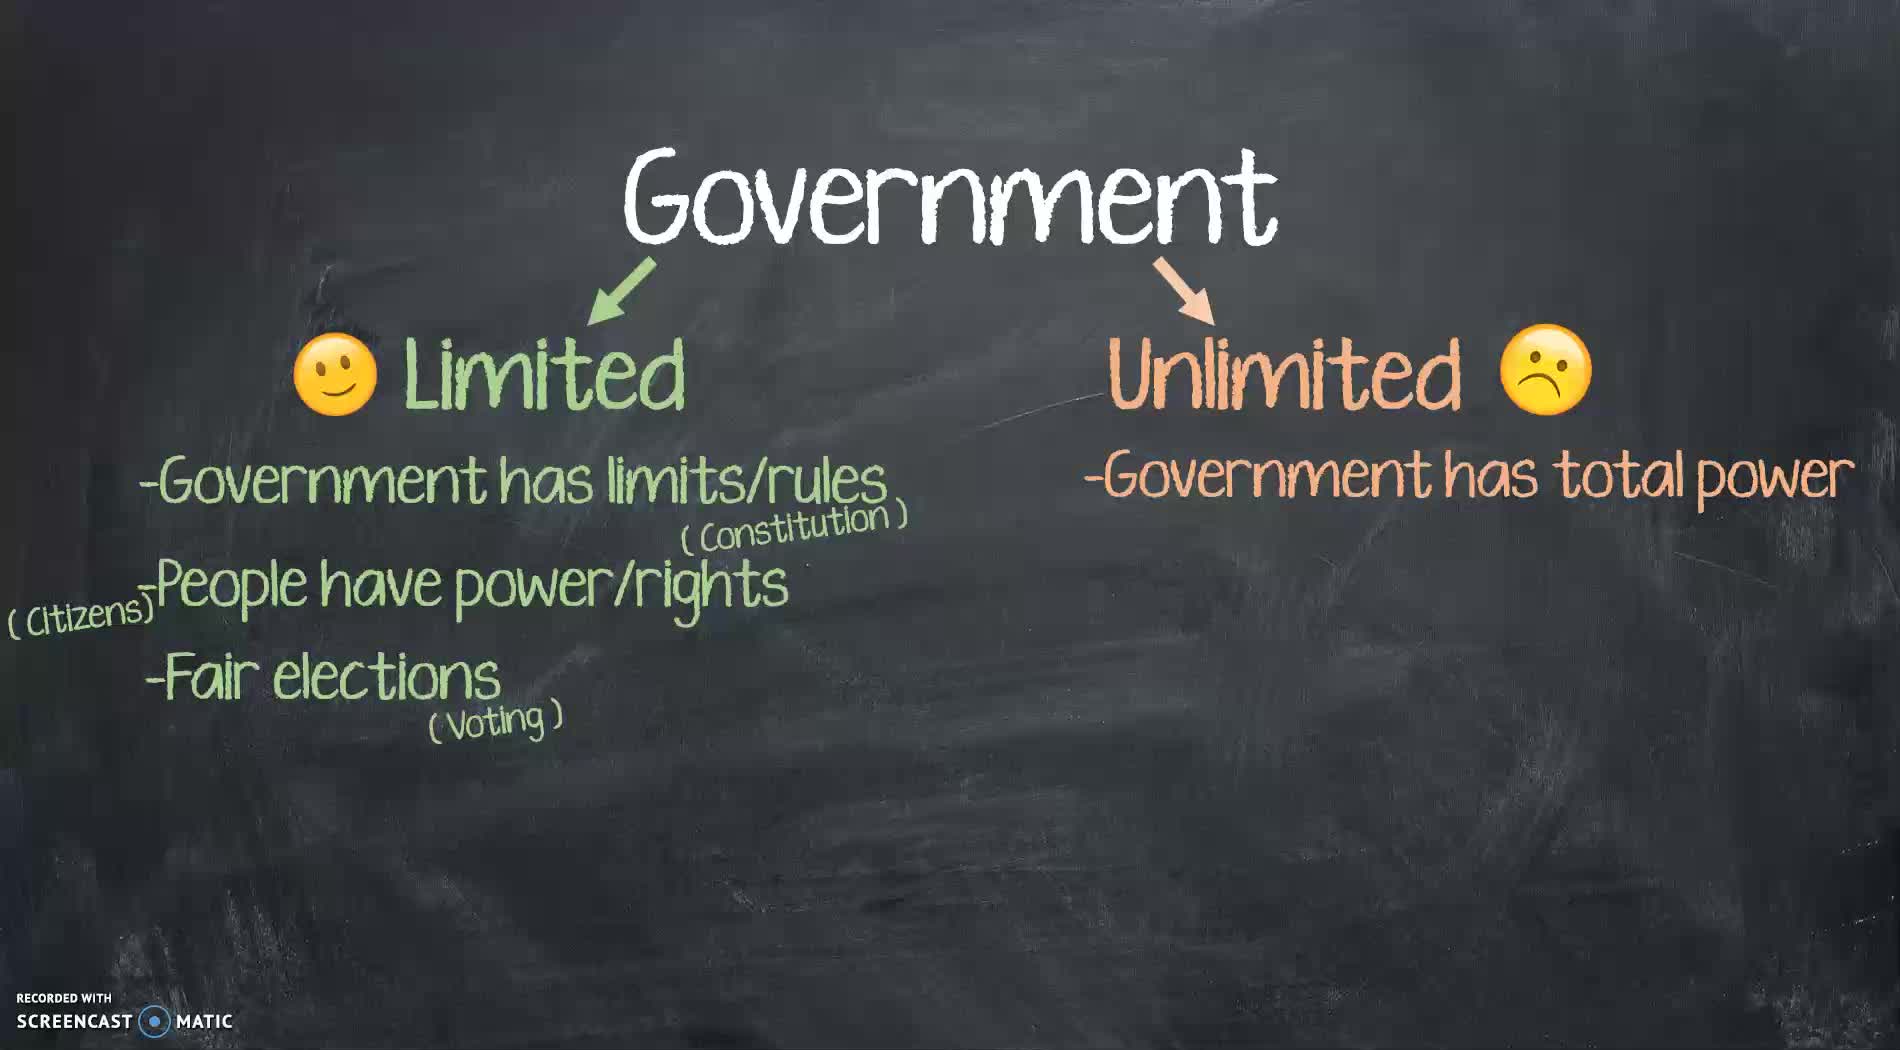 limited government definition